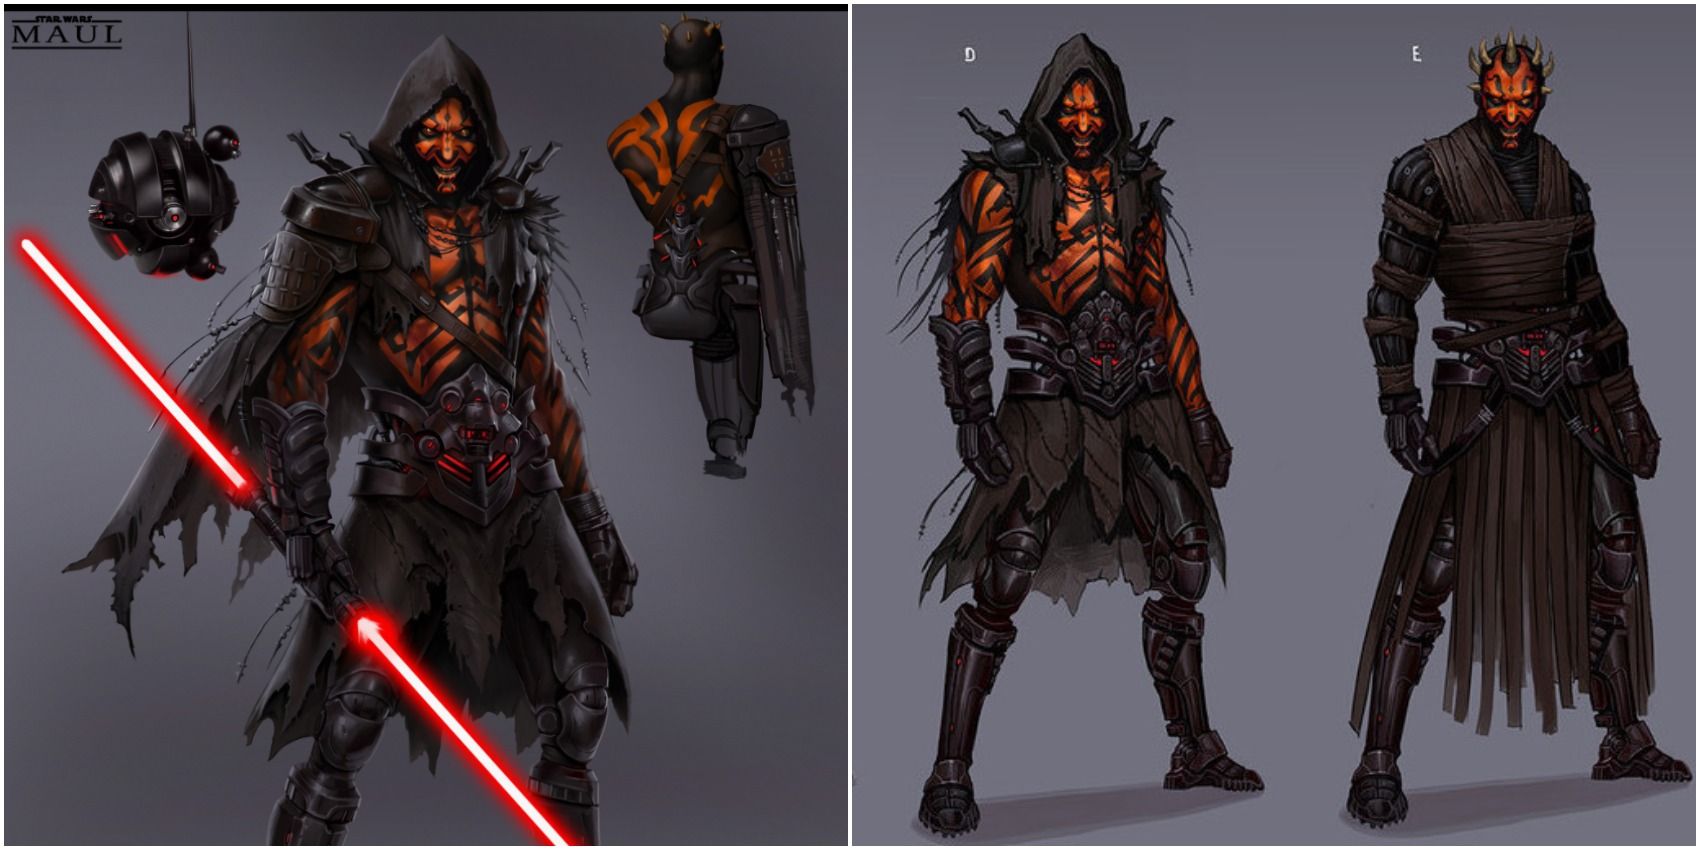 Concept art from a canceled Maul game